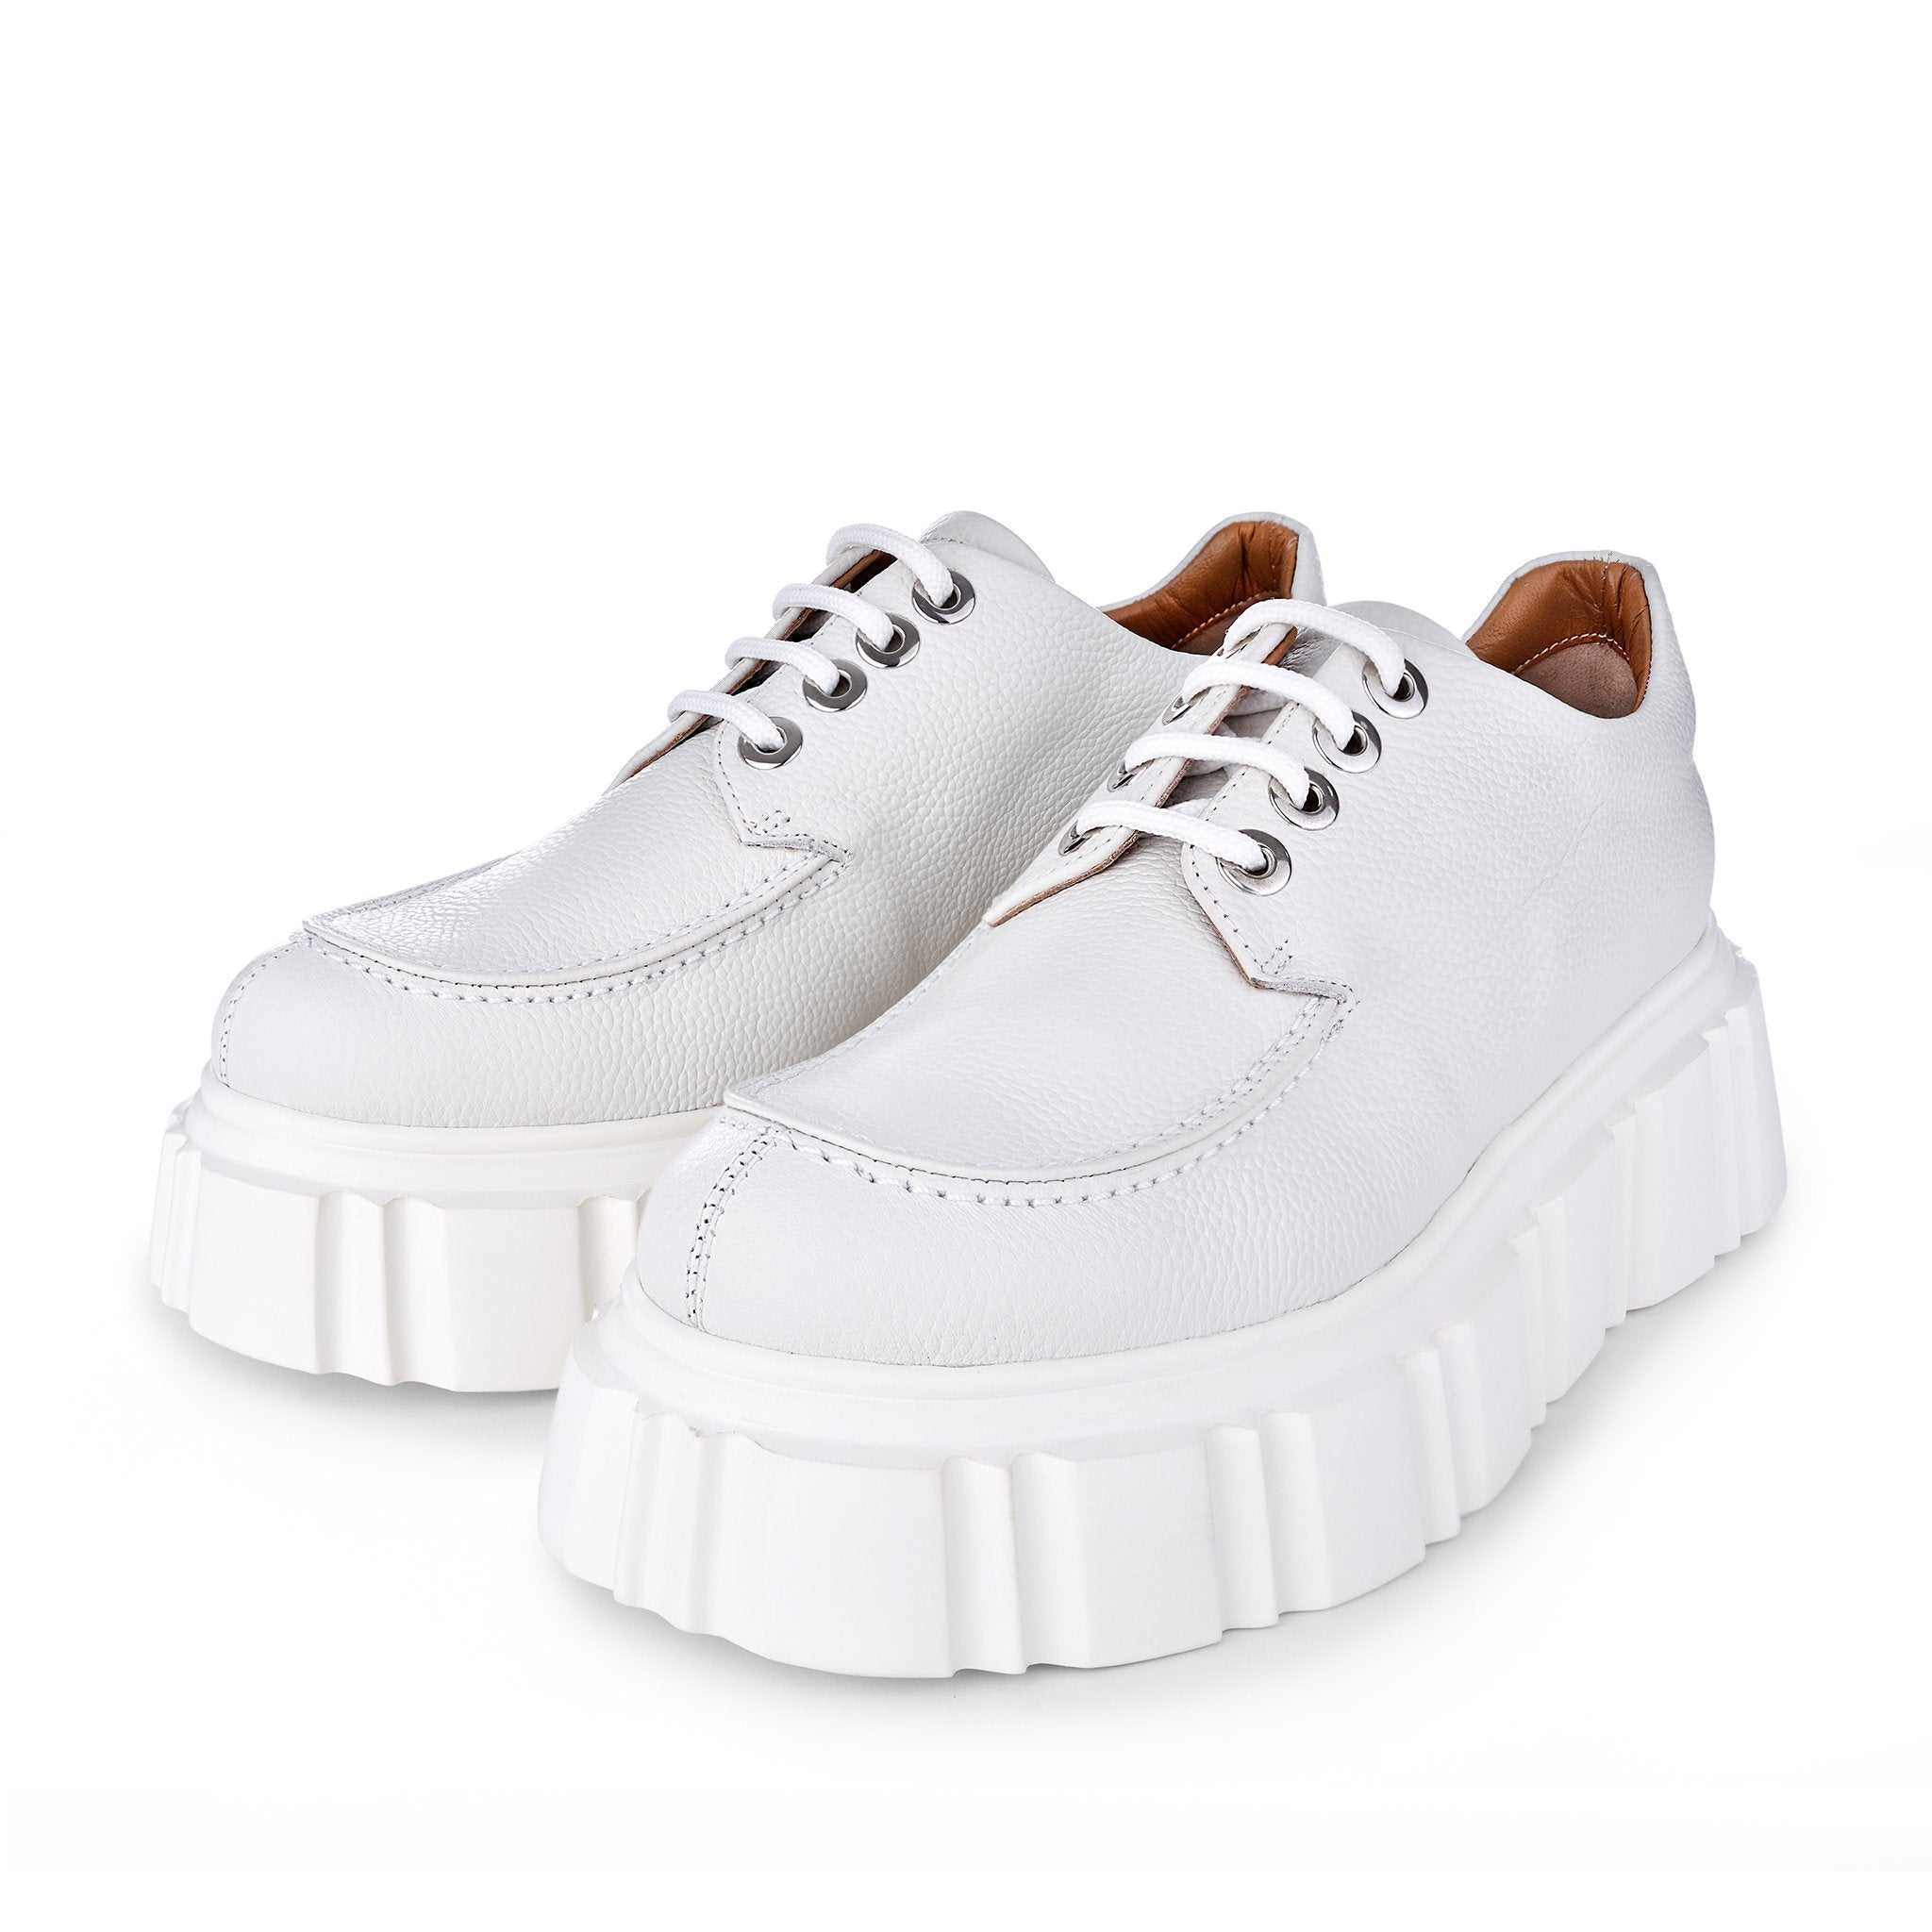 Jun Off White Lace-Up Loafers 2210-02 - 06